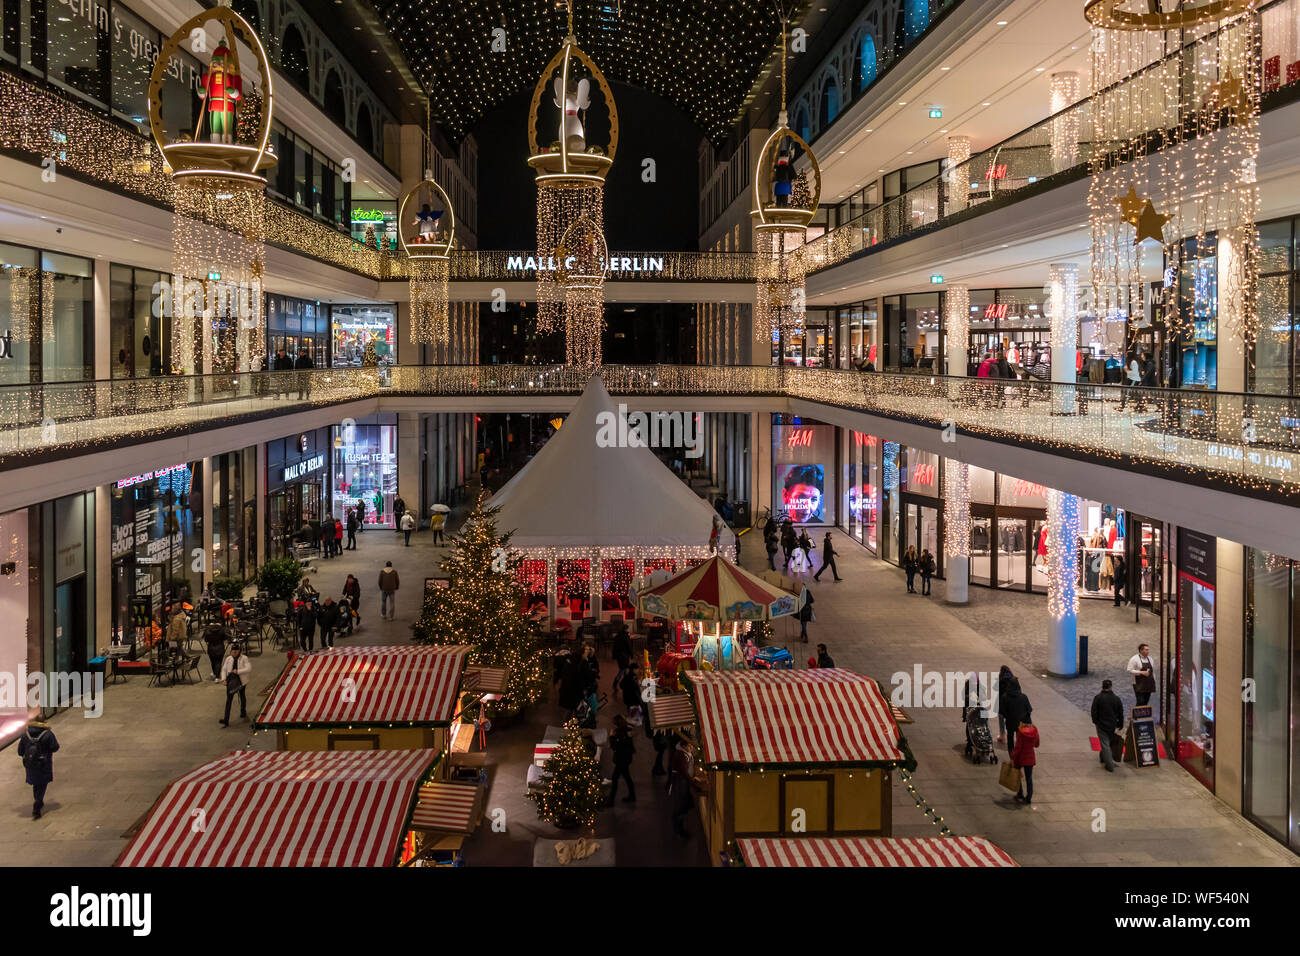 Berlin, Germany - December 11, 2018: Mall of Berlin illuminated and decorated for holidays. Stock Photo